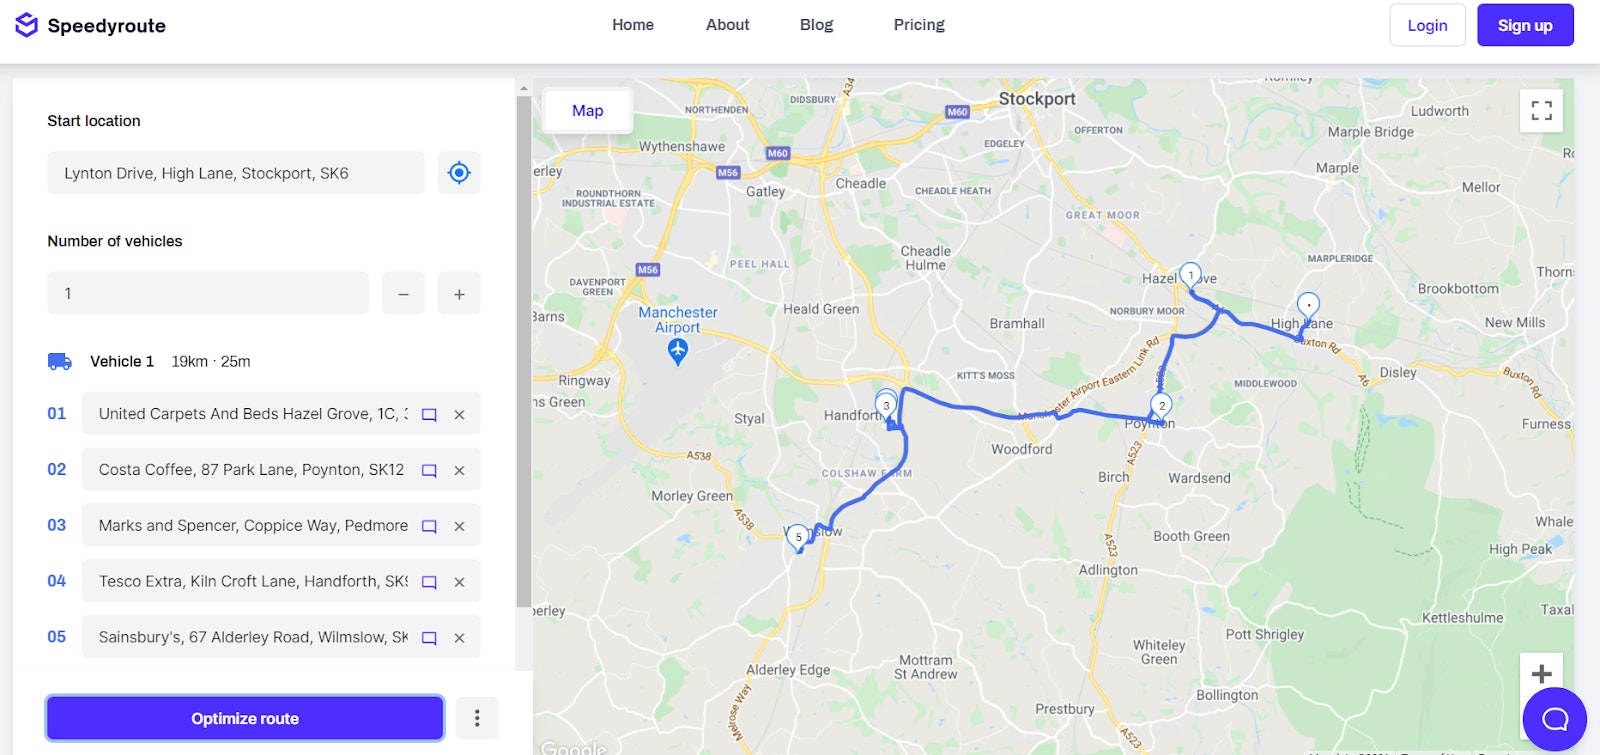 Sample image of the Speedy Route app showing a route with five delivery points on a map. 